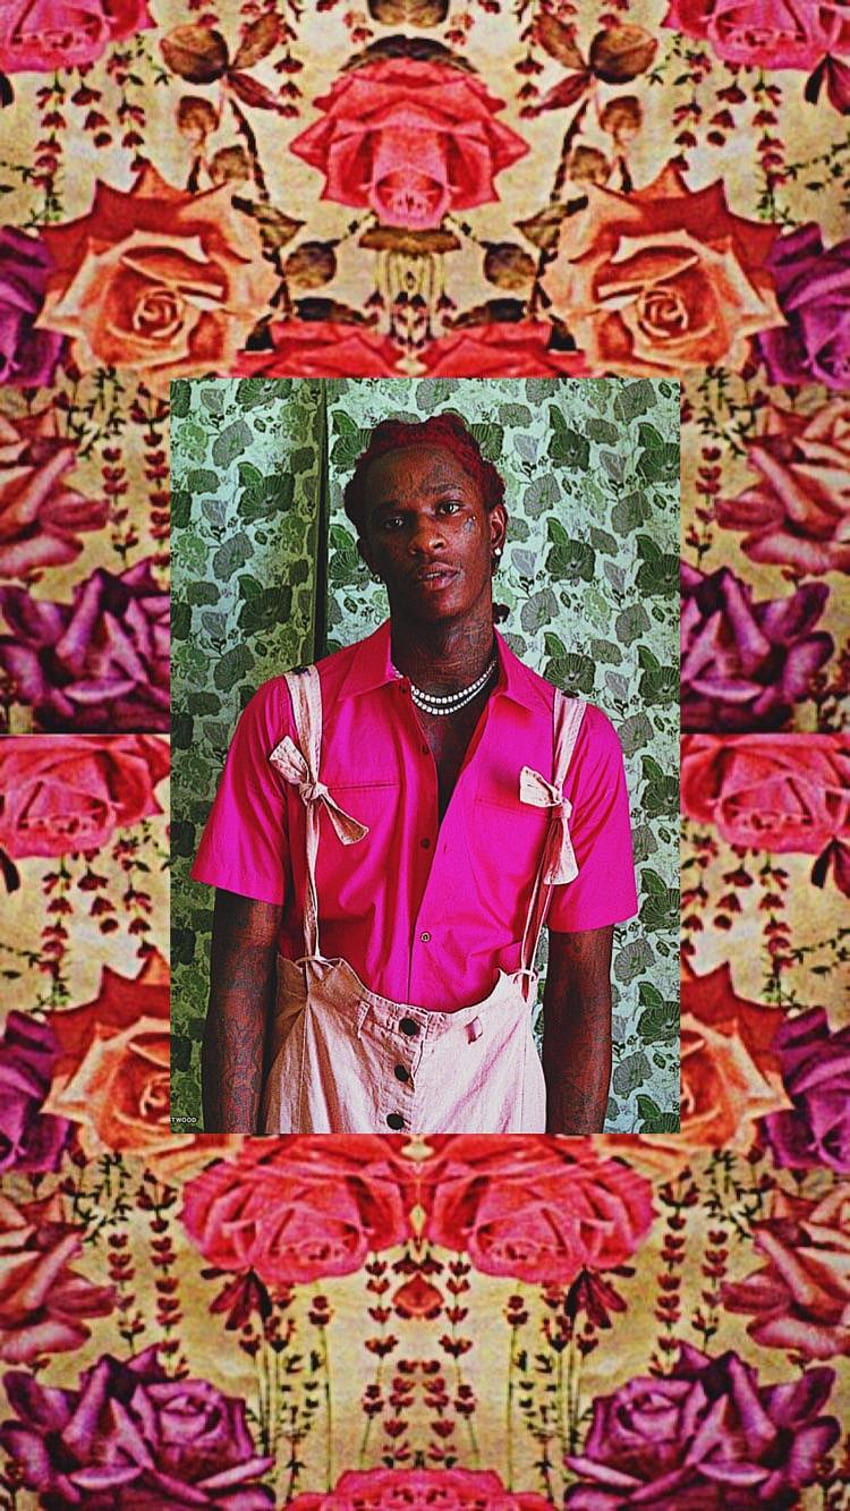 Made this iPhone background. A bit fruity but I hope you guys like, Cue Young Thug HD phone wallpaper